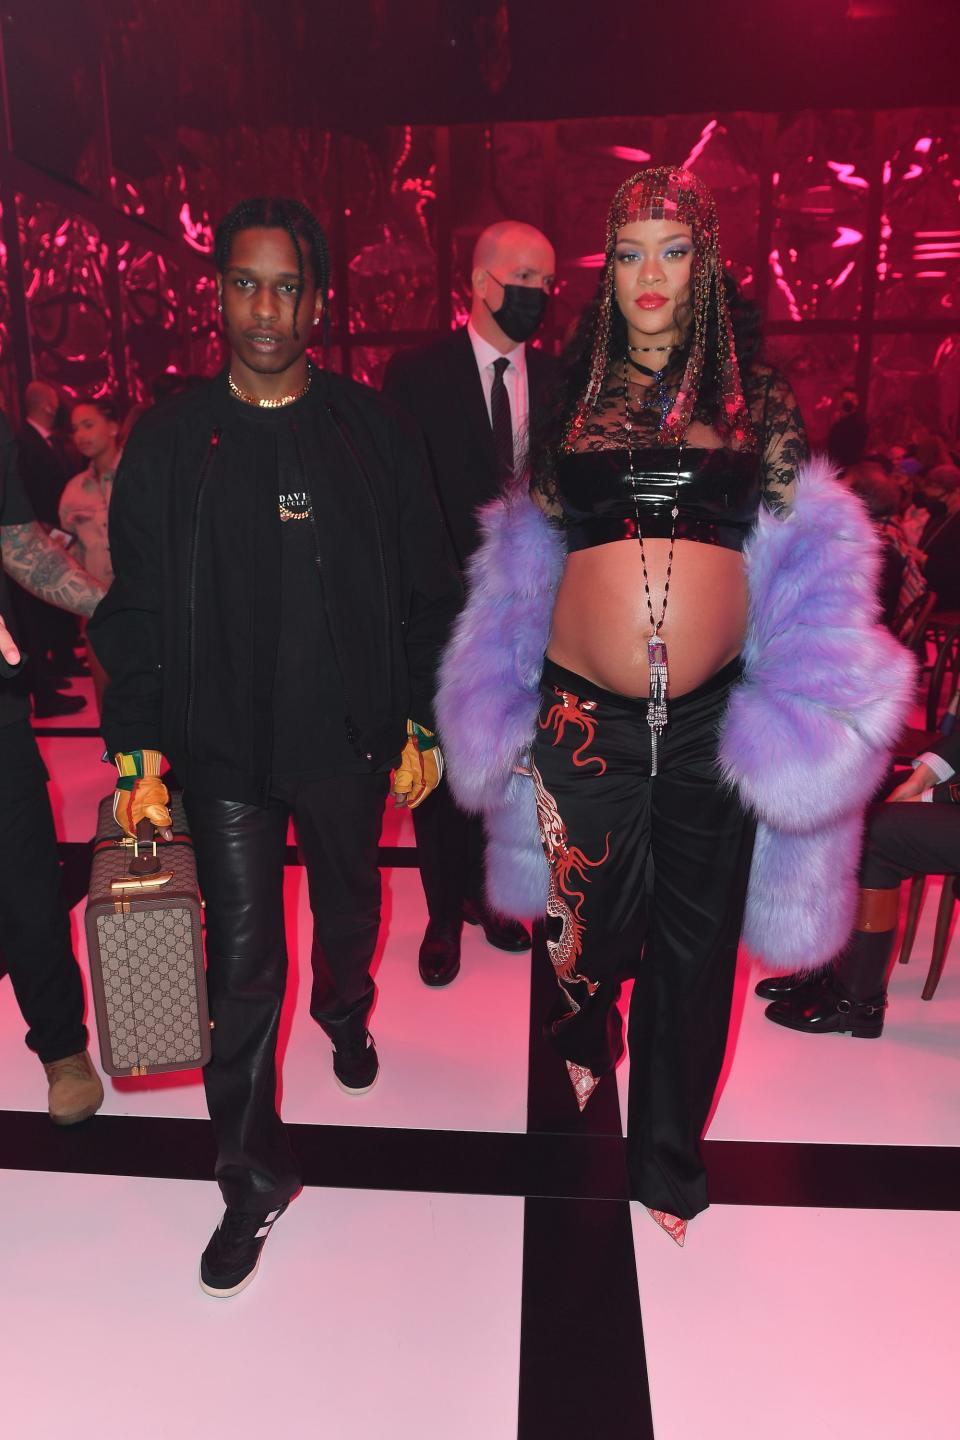 Asap Rocky and Rihanna attend the Gucci show during Milan Fashion Week on February 25, 2022.